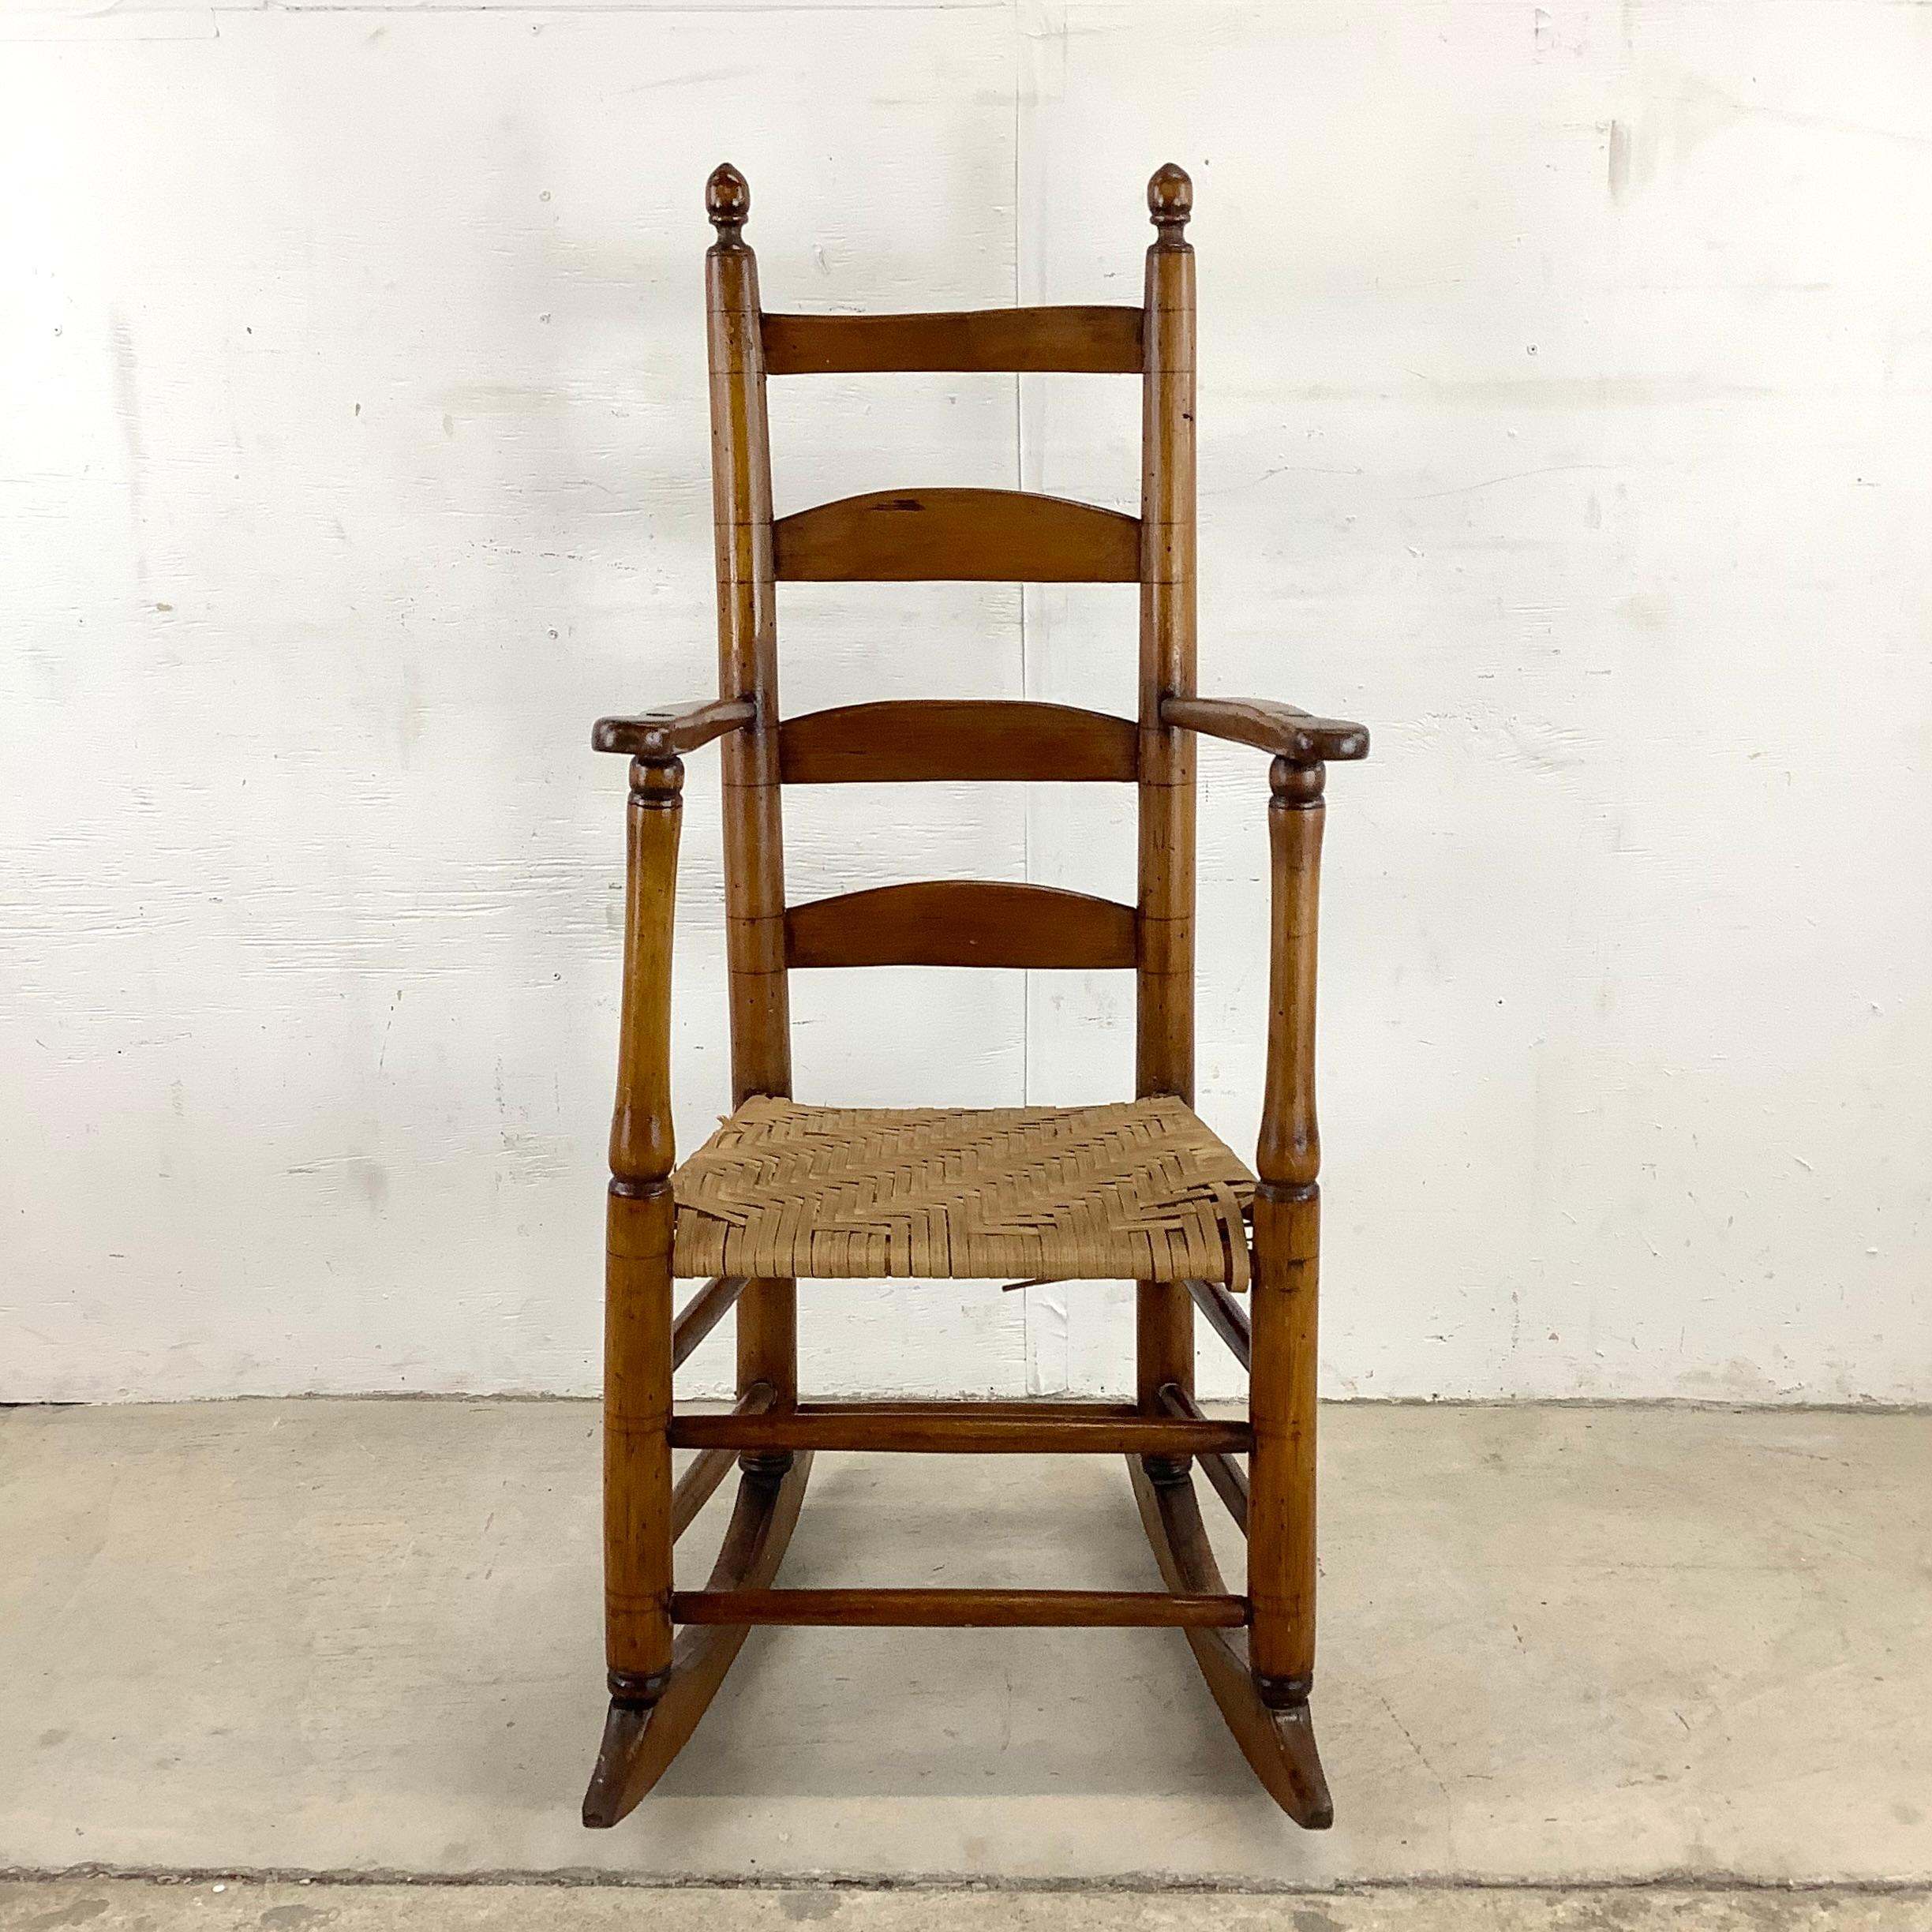 This antique rush seat child rocking chair is a charming piece that combines nostalgic style and timeless functionality. This exquisite rocking chair is the perfect addition to your child's room or any space that needs a touch of vintage